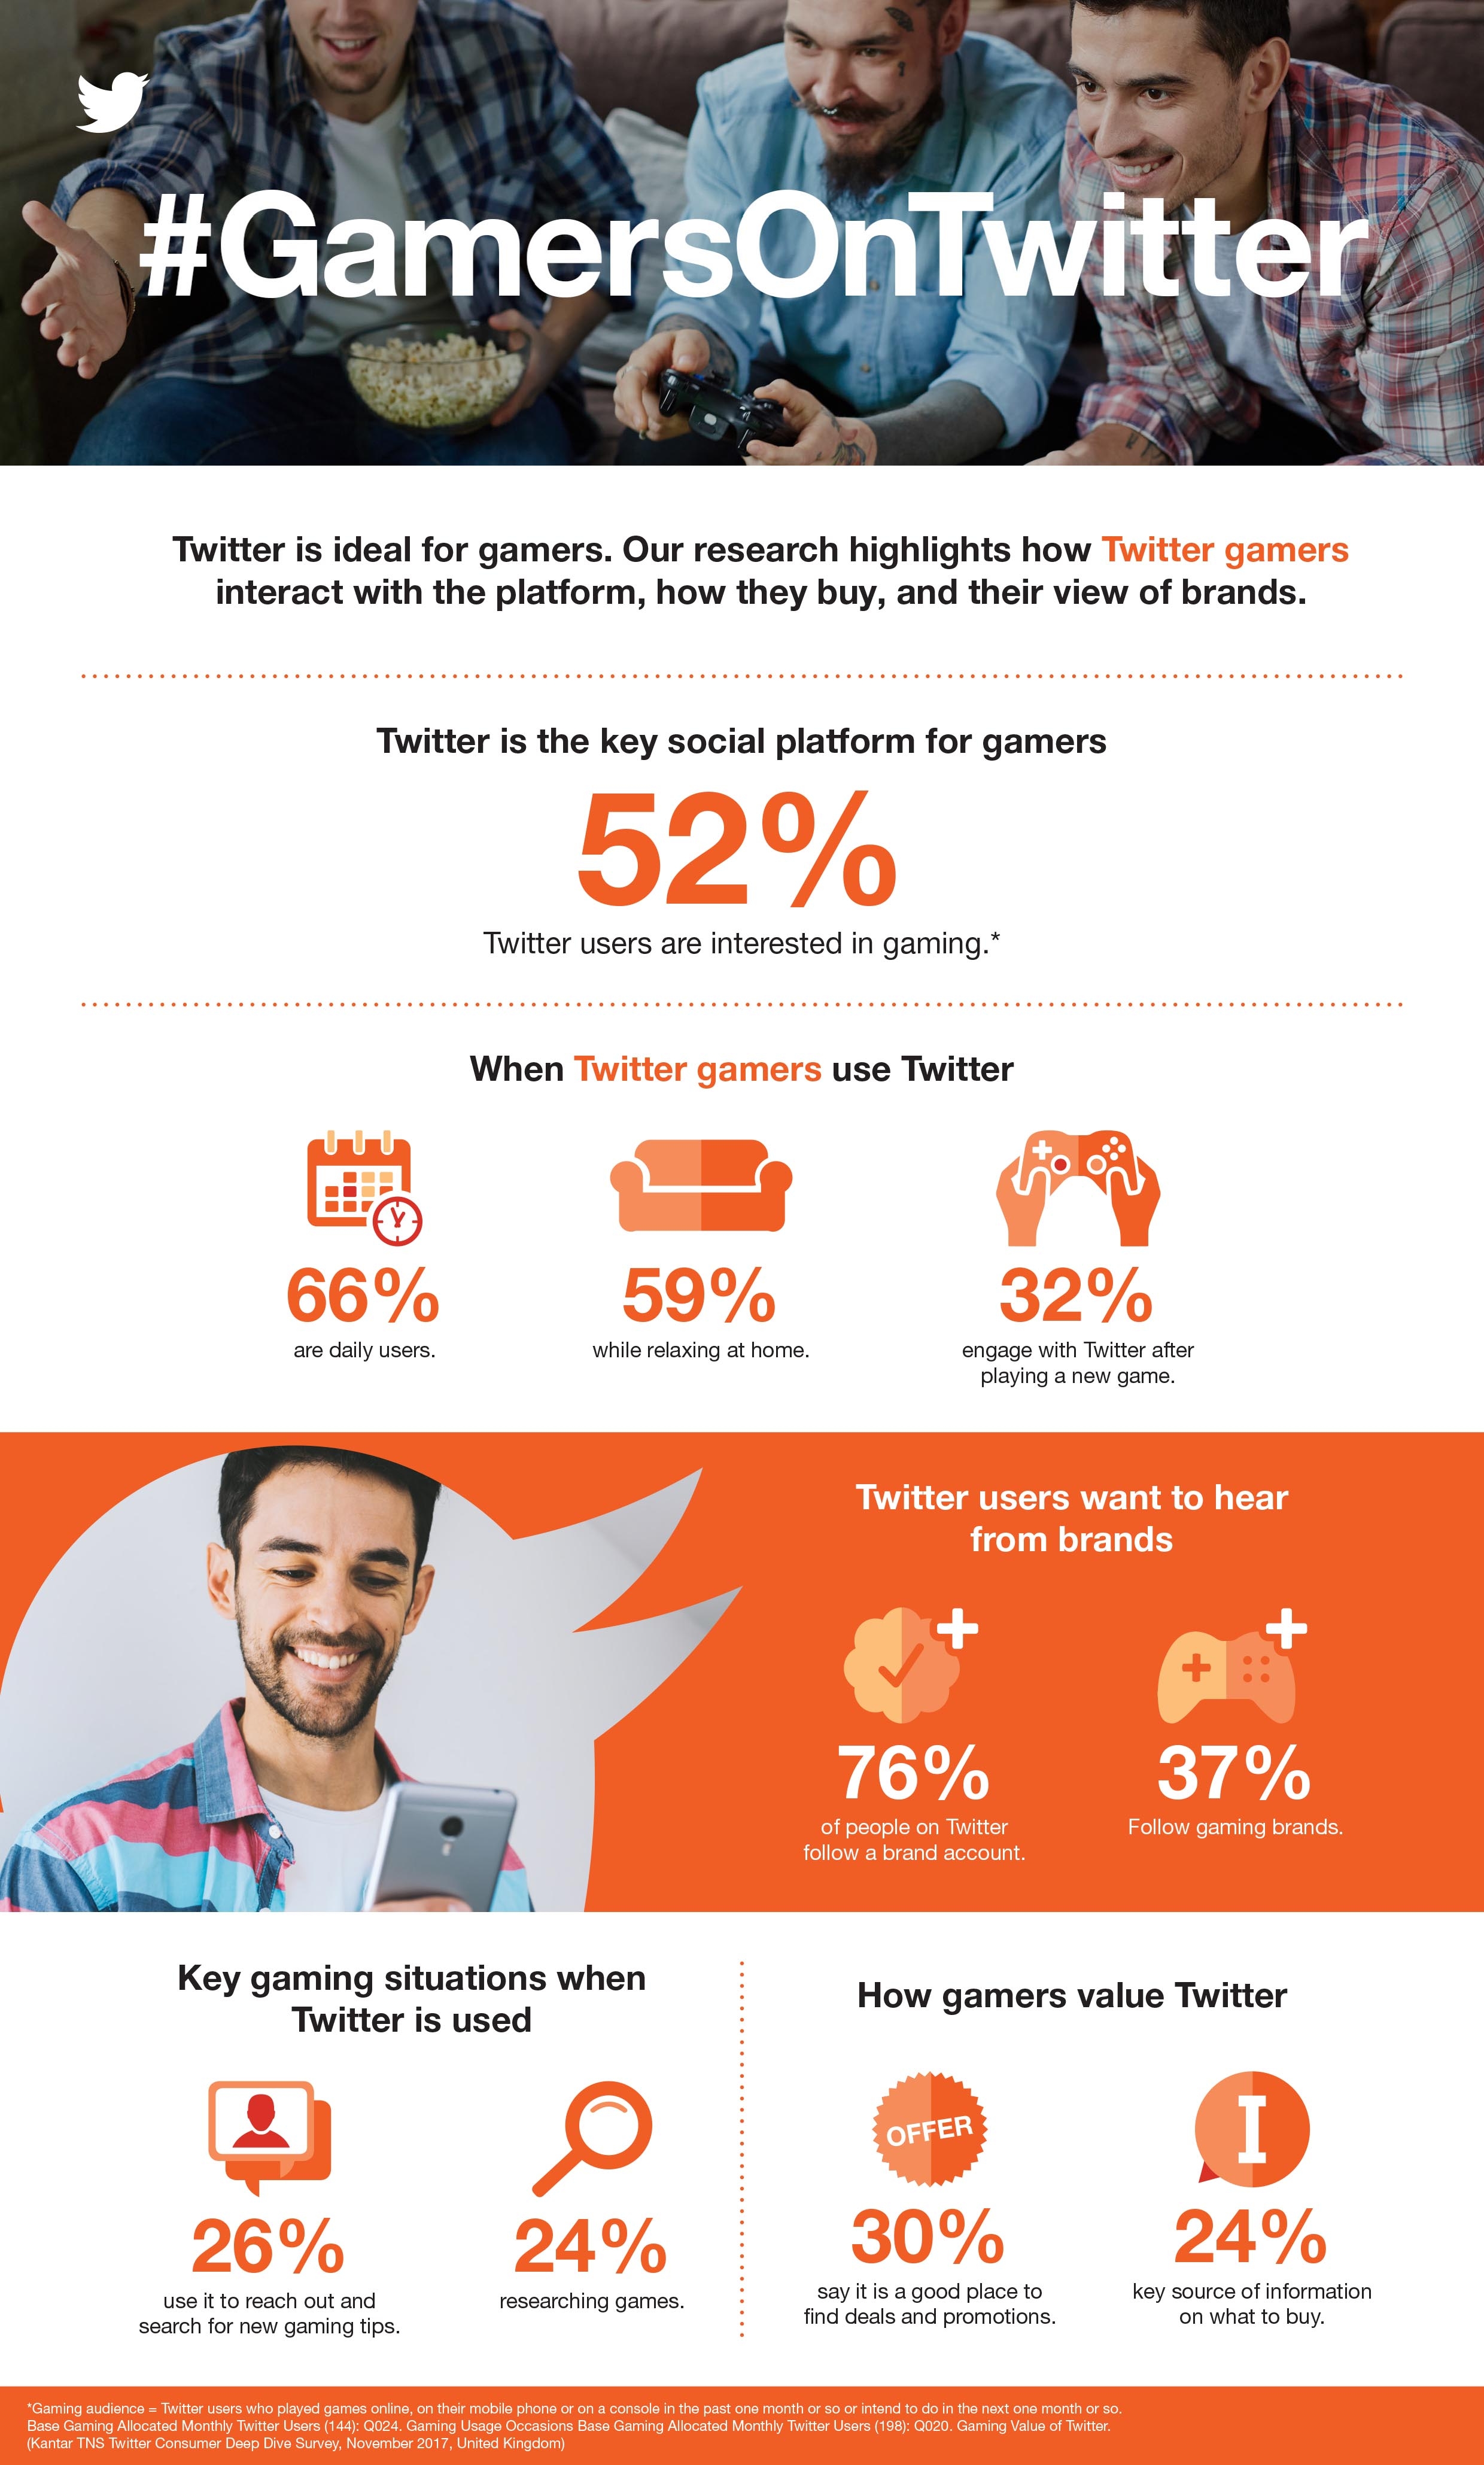 gaming businesses use Twitter marketing as gamers